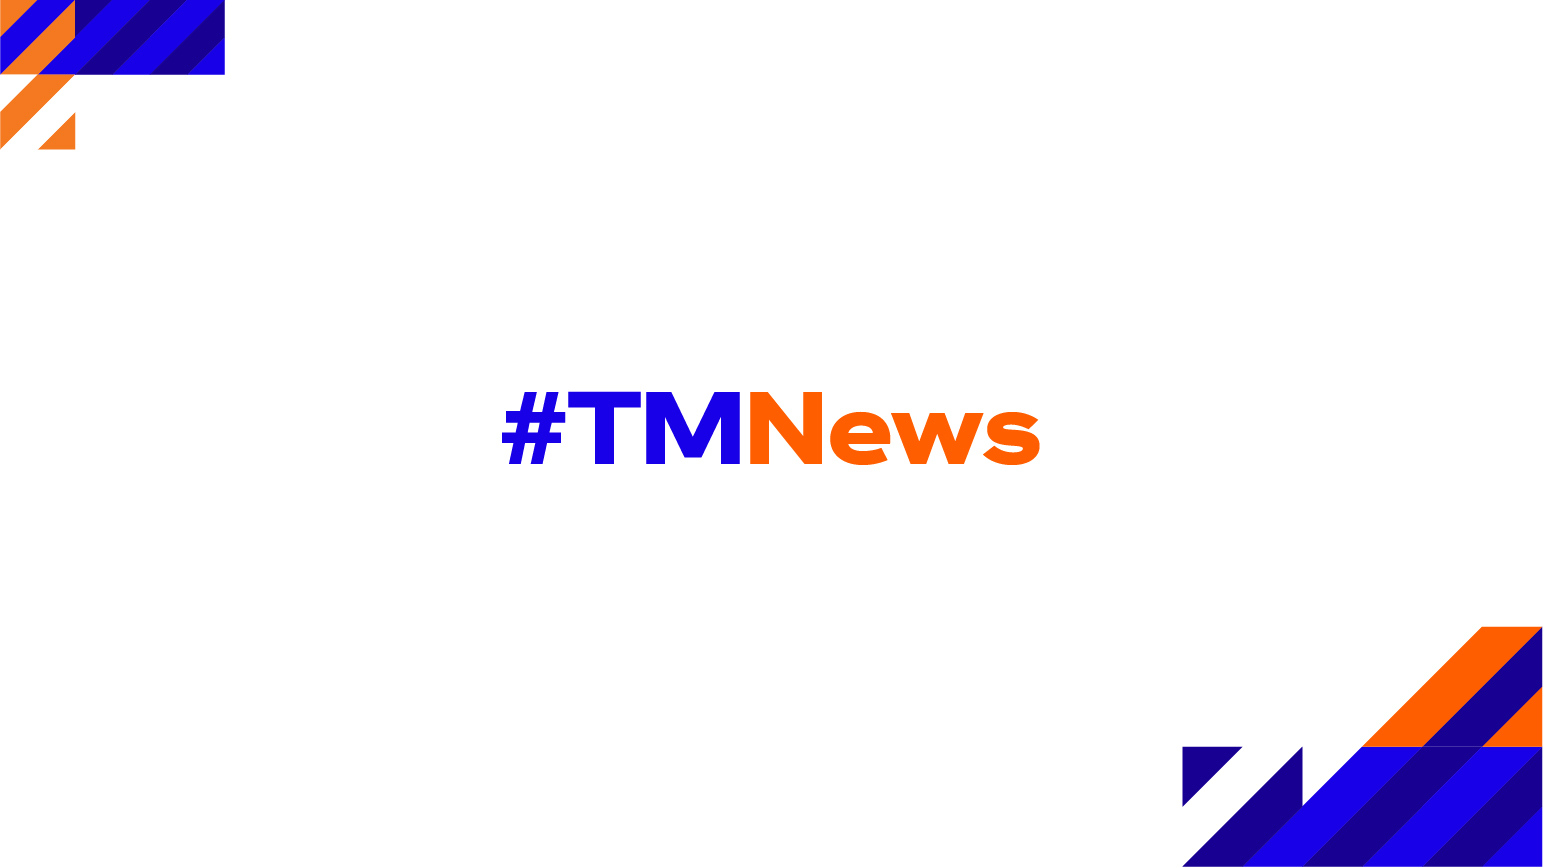 TM Records a Promising 1Q2023 Performance with 2.0% Revenue Growth; Continues to Strengthen its Core Business